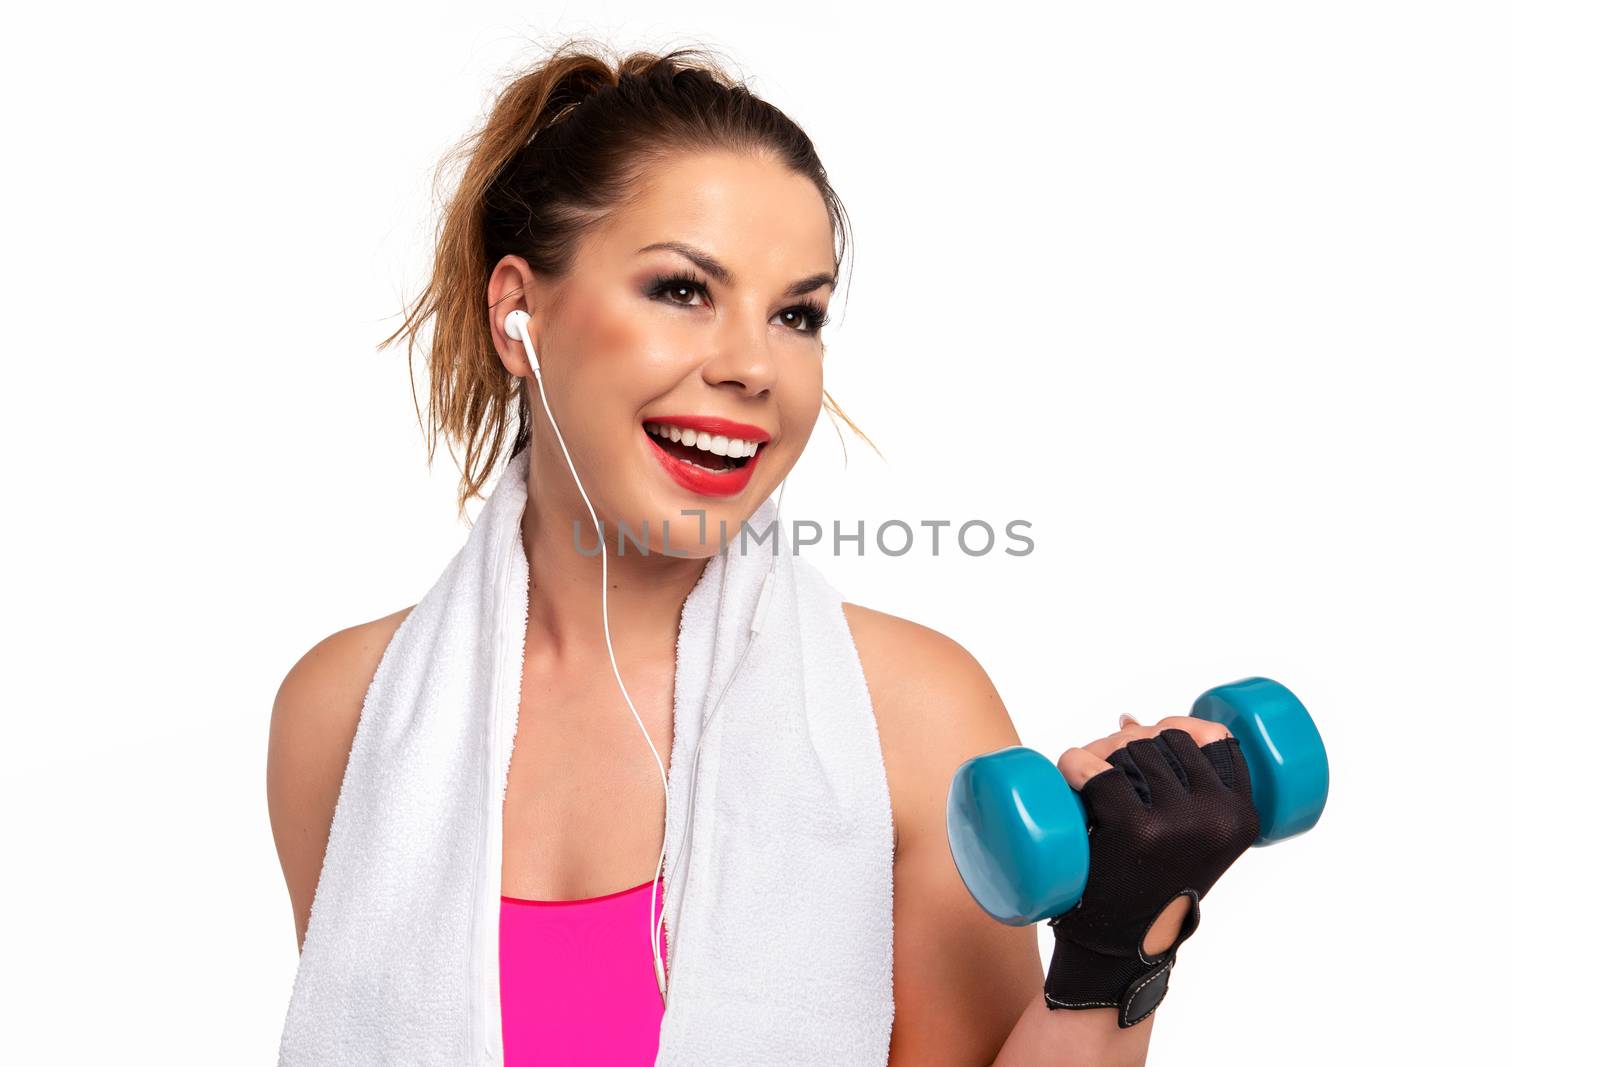 Fitness woman workout by wdnet_studio